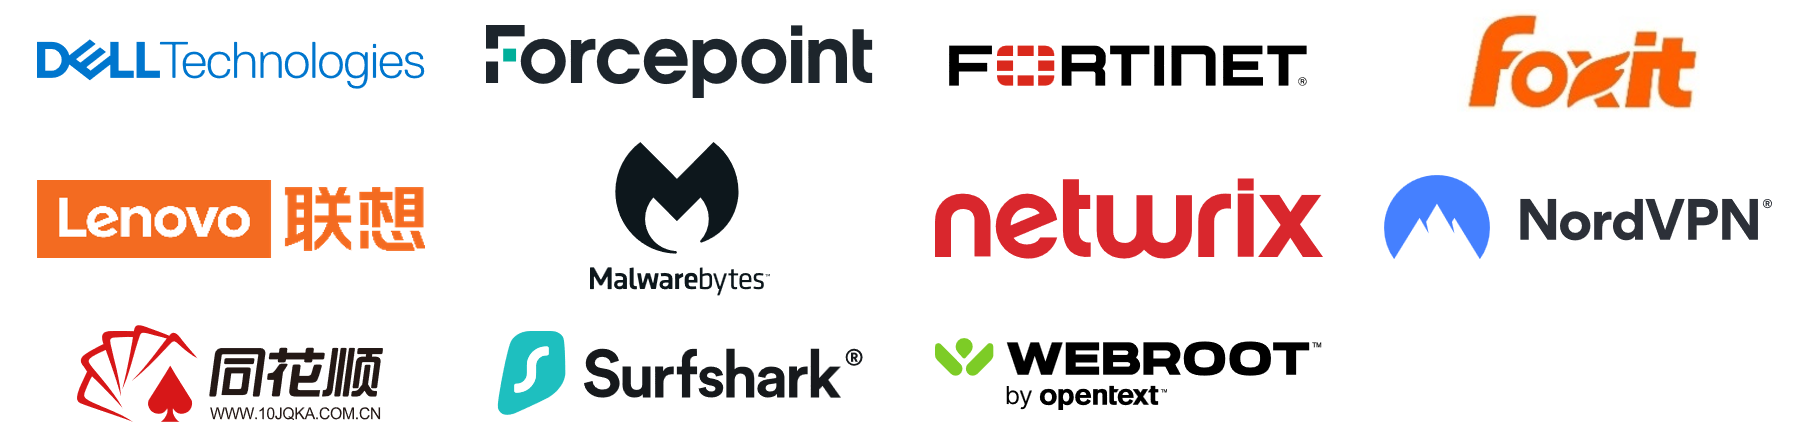 Brands that have used the ARM Advisory Service: Dell, Forcepoint, Fortinet, Foxit, Lenovo, Malwarebytes, Netwrix, NordVPN, 10JQKA, Surfshark and Webroot